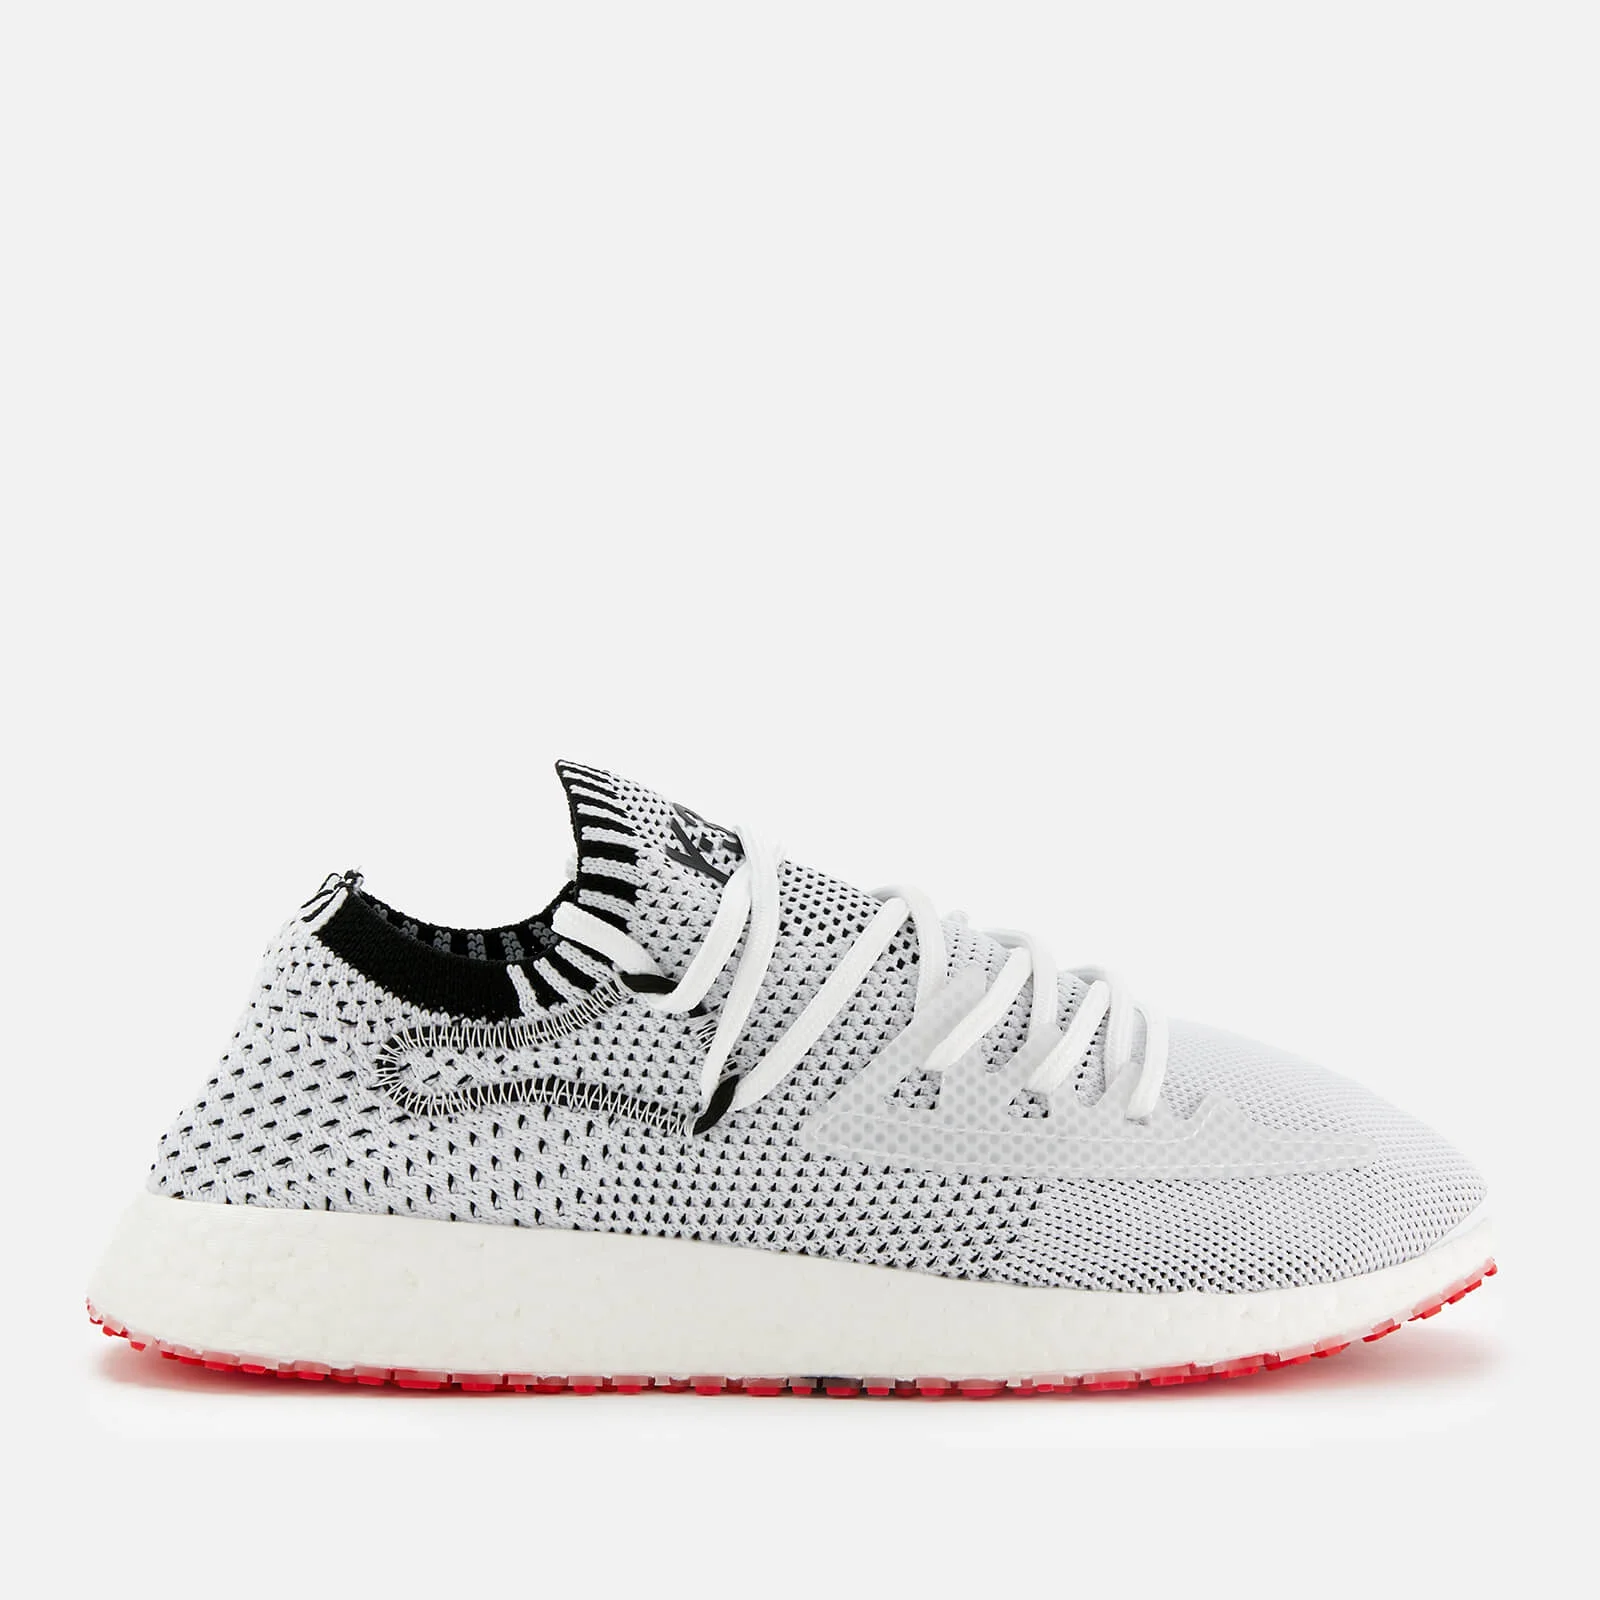 Y-3 Raito Racer Trainers - FTWR White/FTWR White Image 1